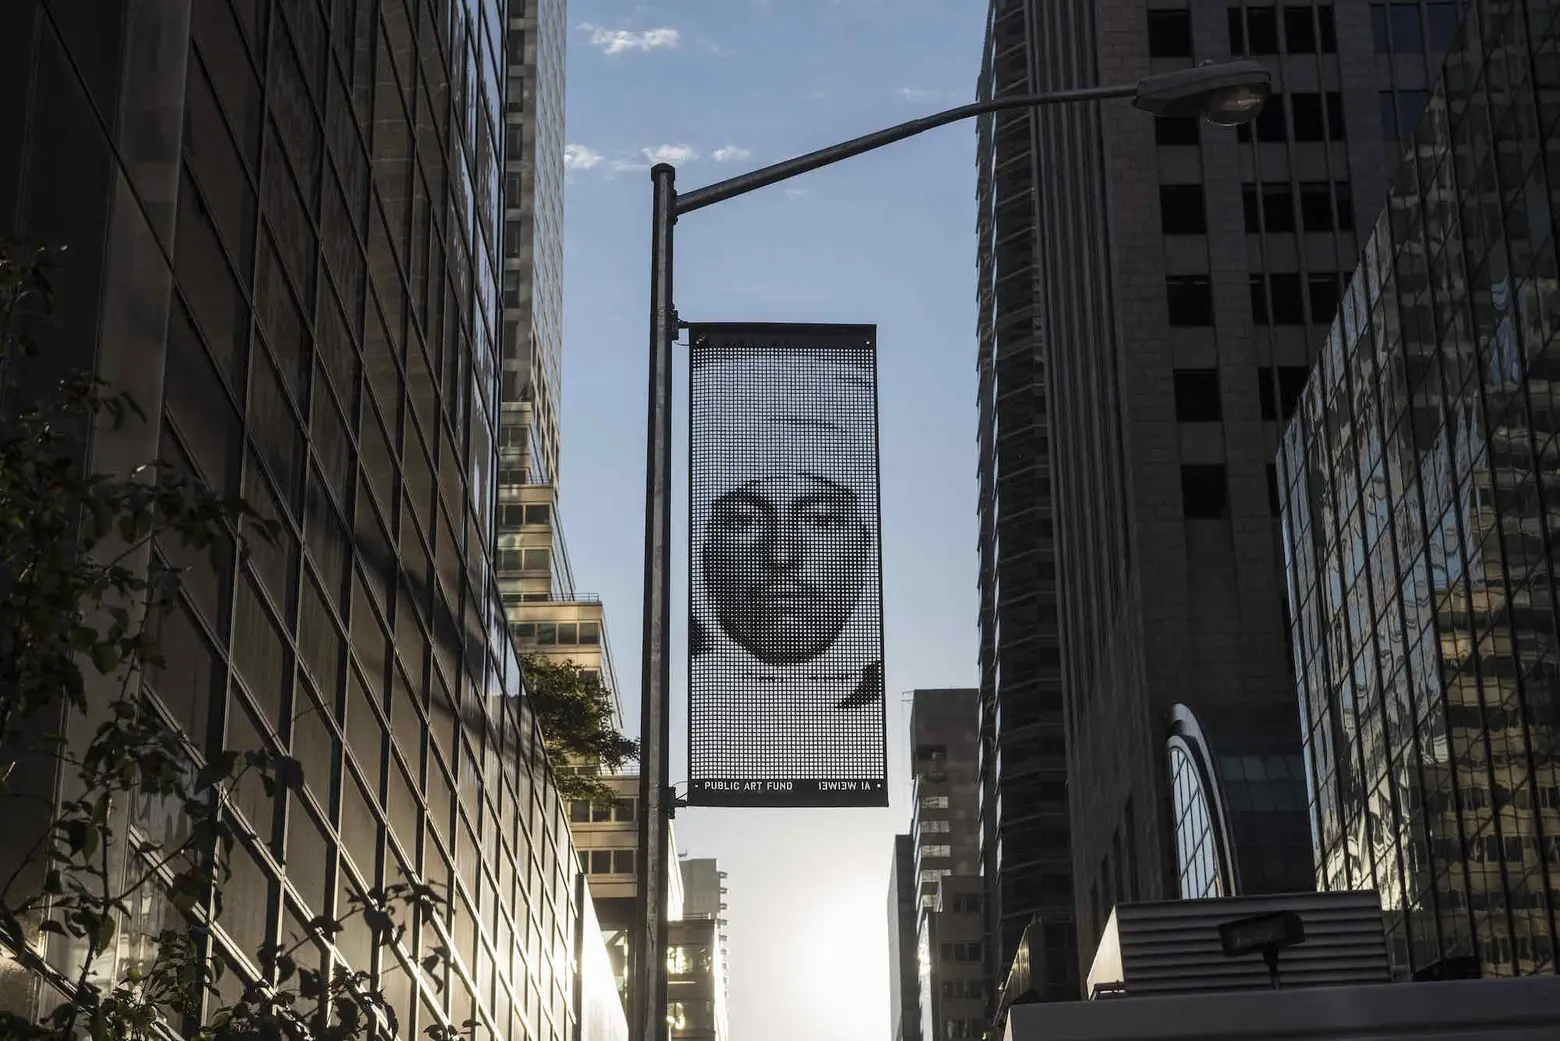 Portrait banners from Ai Weiwei’s NYC ‘Fences’ project available for sale to benefit refugee charities